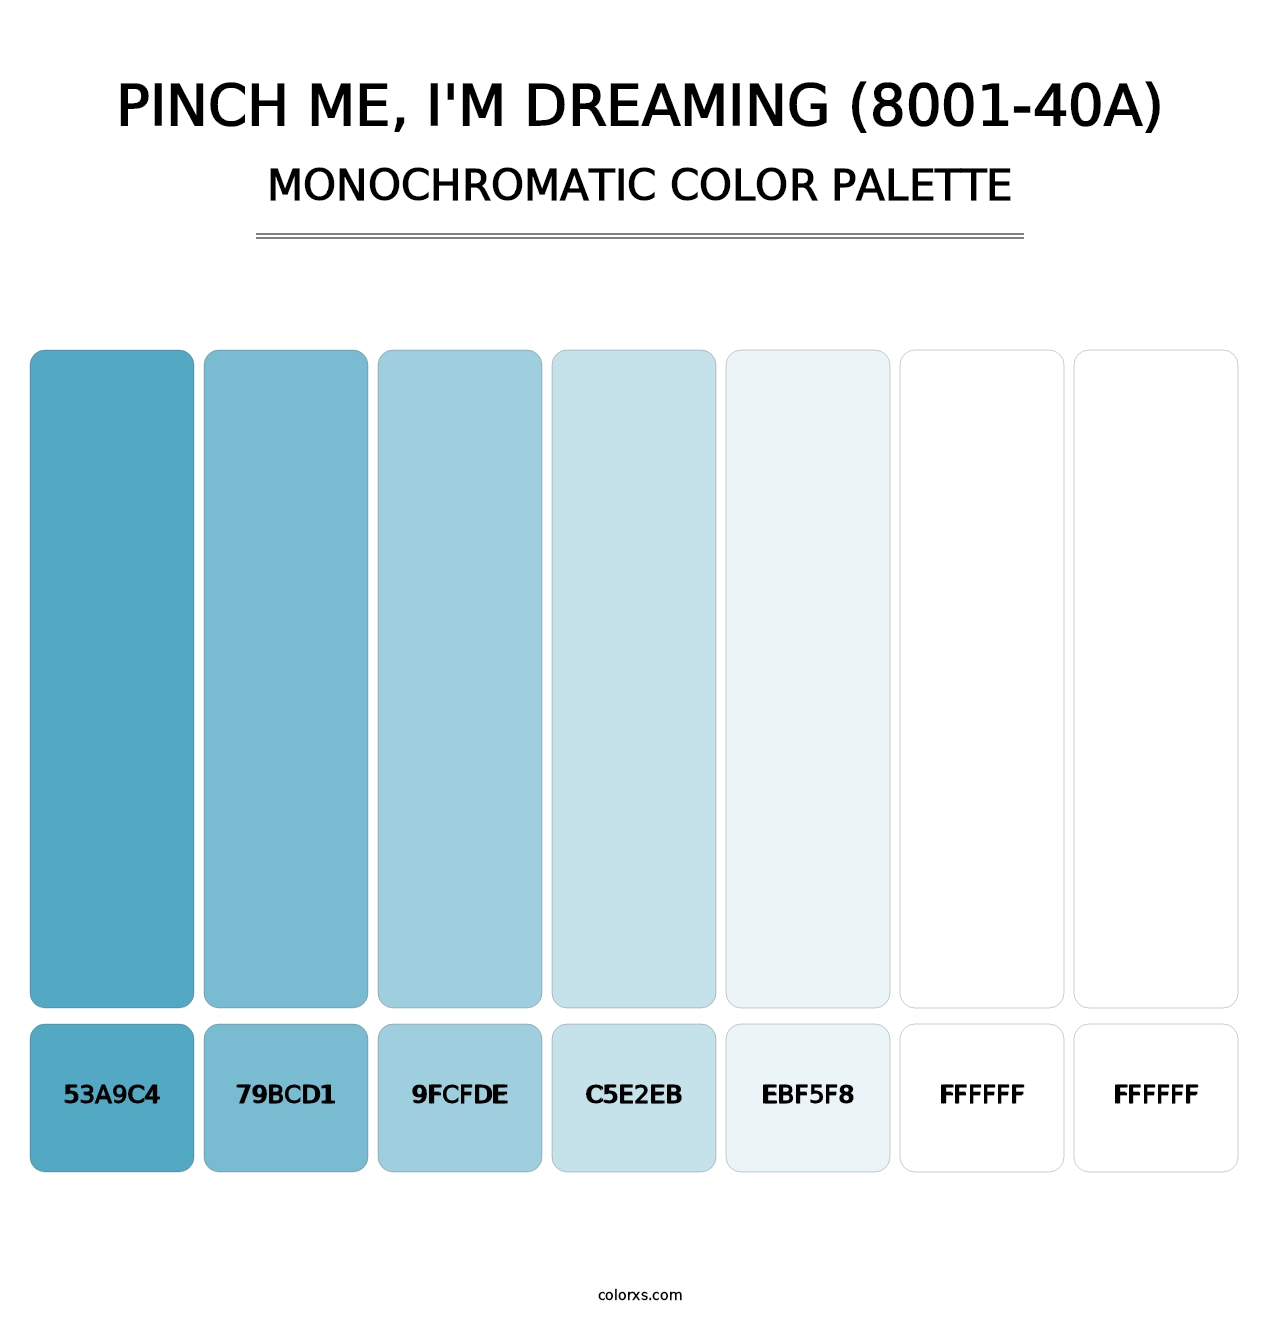 Pinch Me, I'm Dreaming (8001-40A) - Monochromatic Color Palette